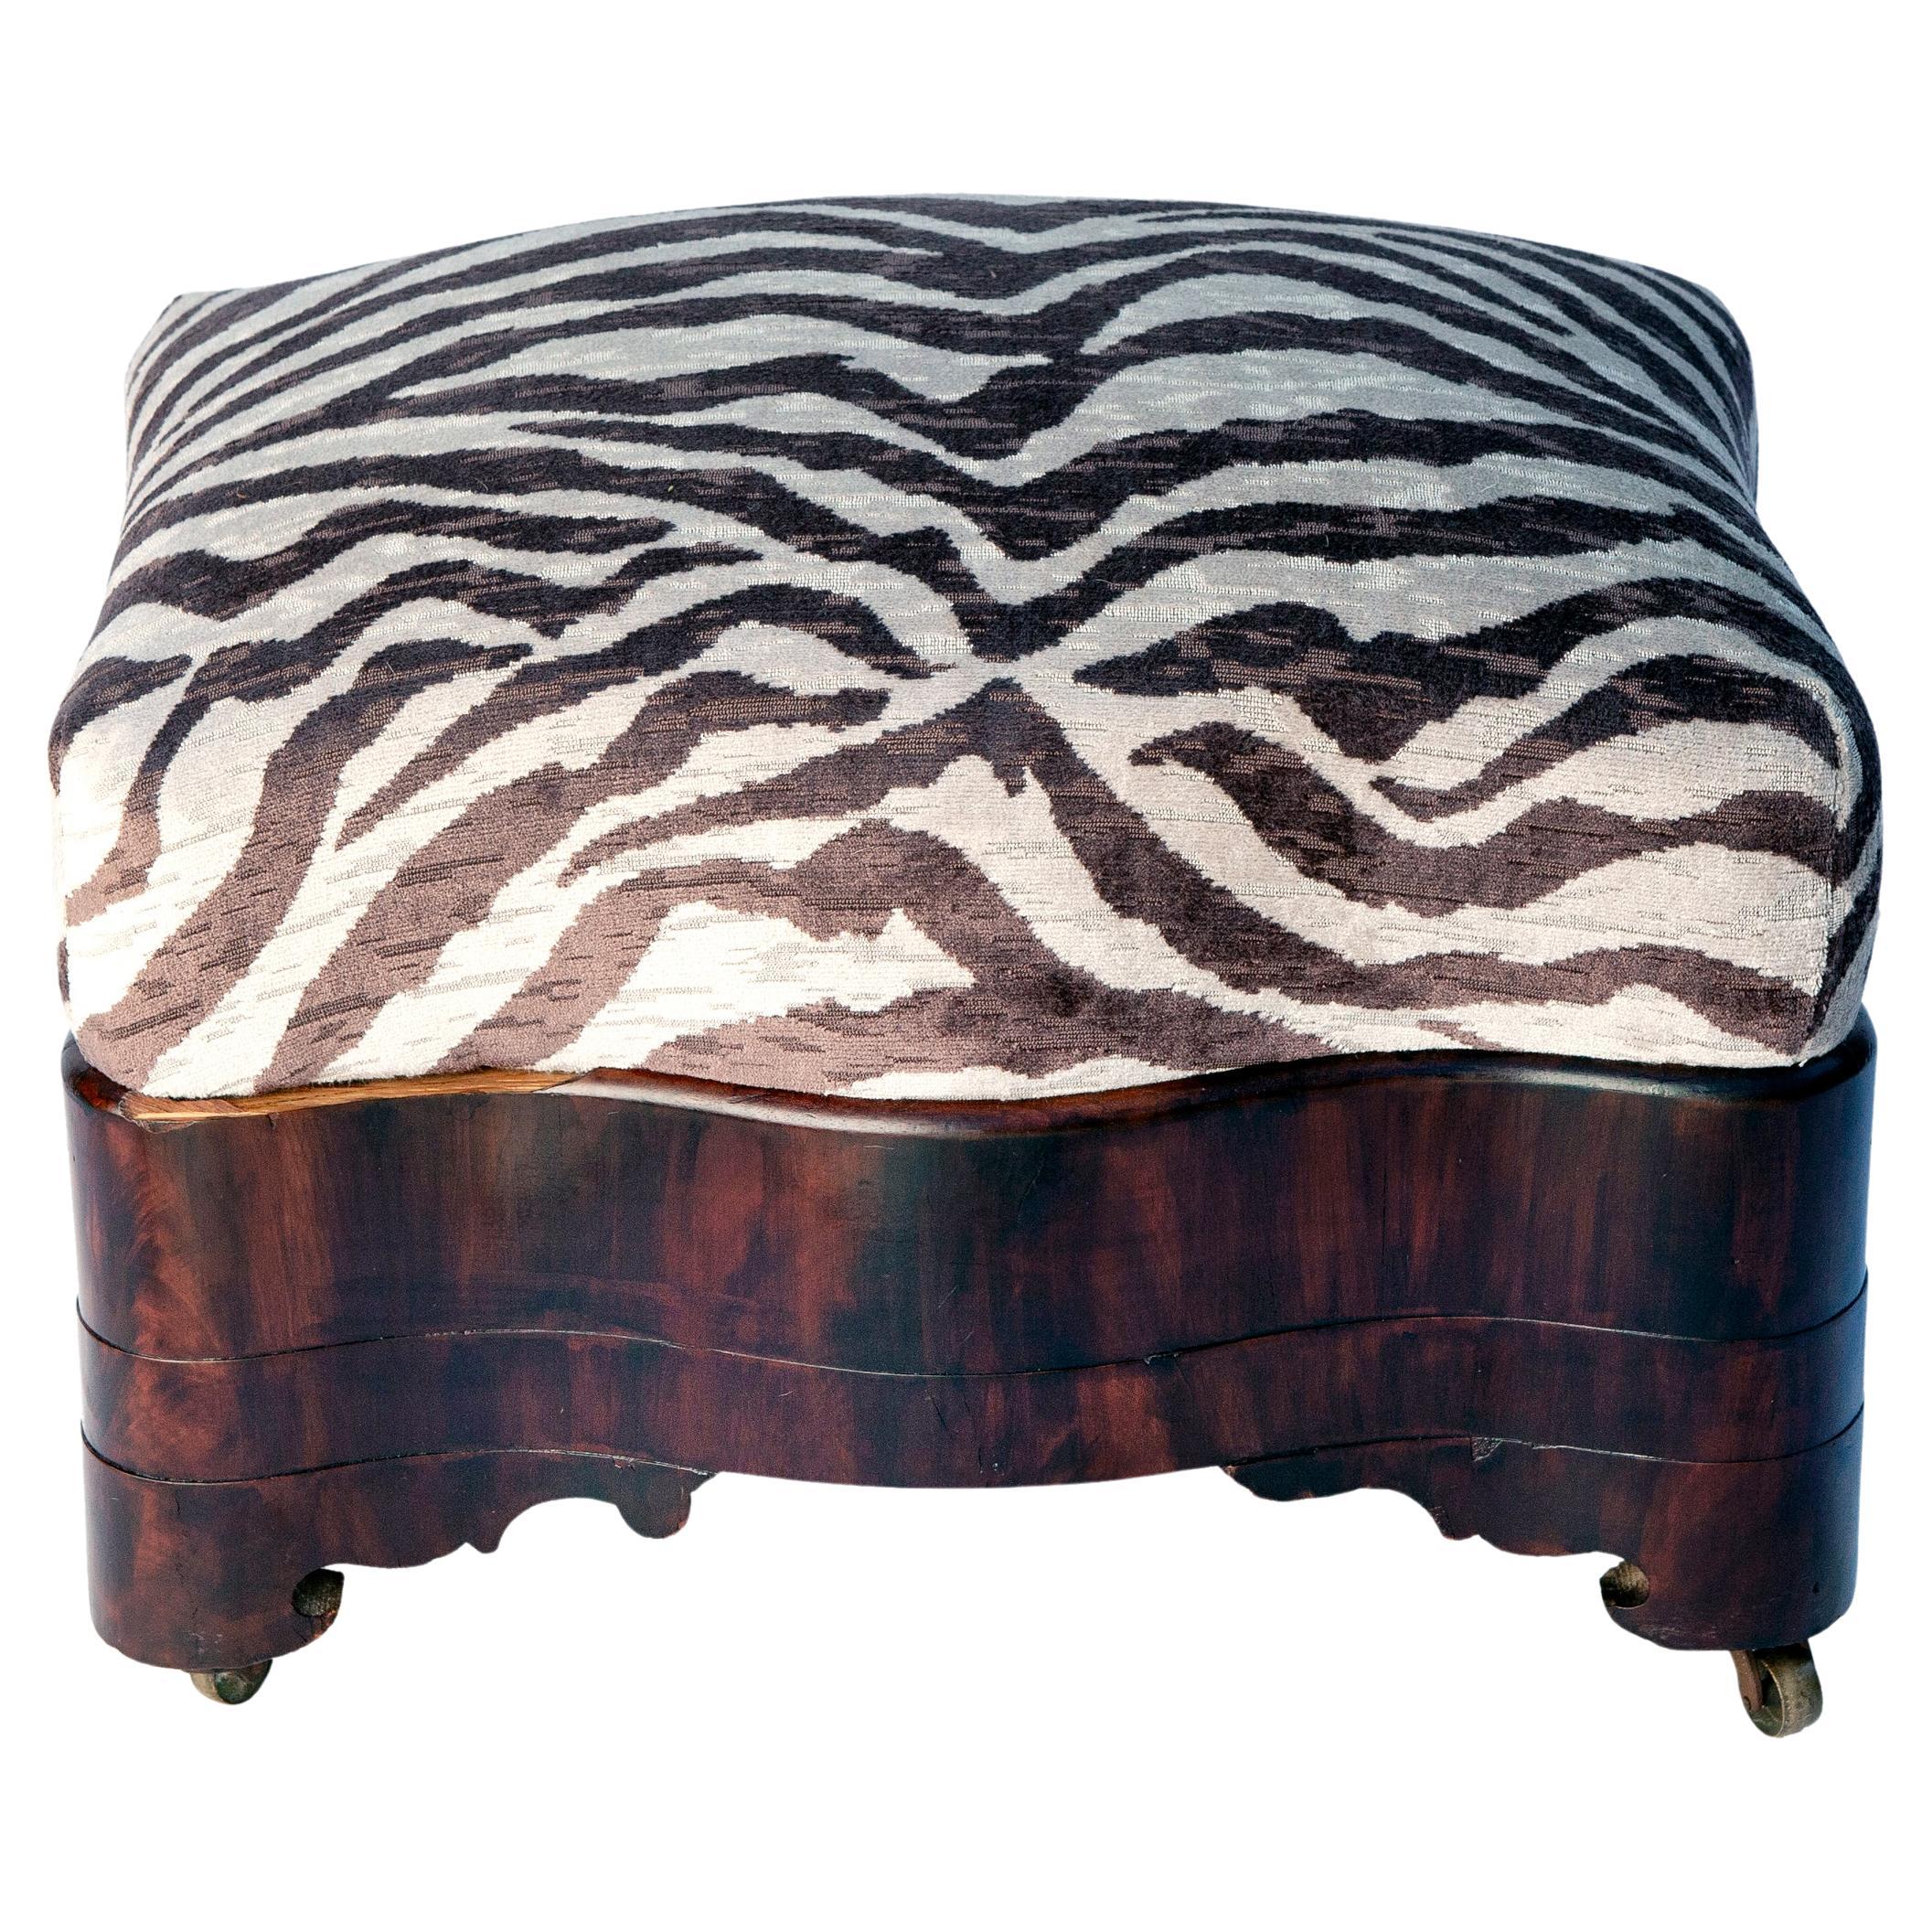 Flame mahogany curvy 19thC English Empire period ottoman in Italian Zebra Upholstery on the original casters.